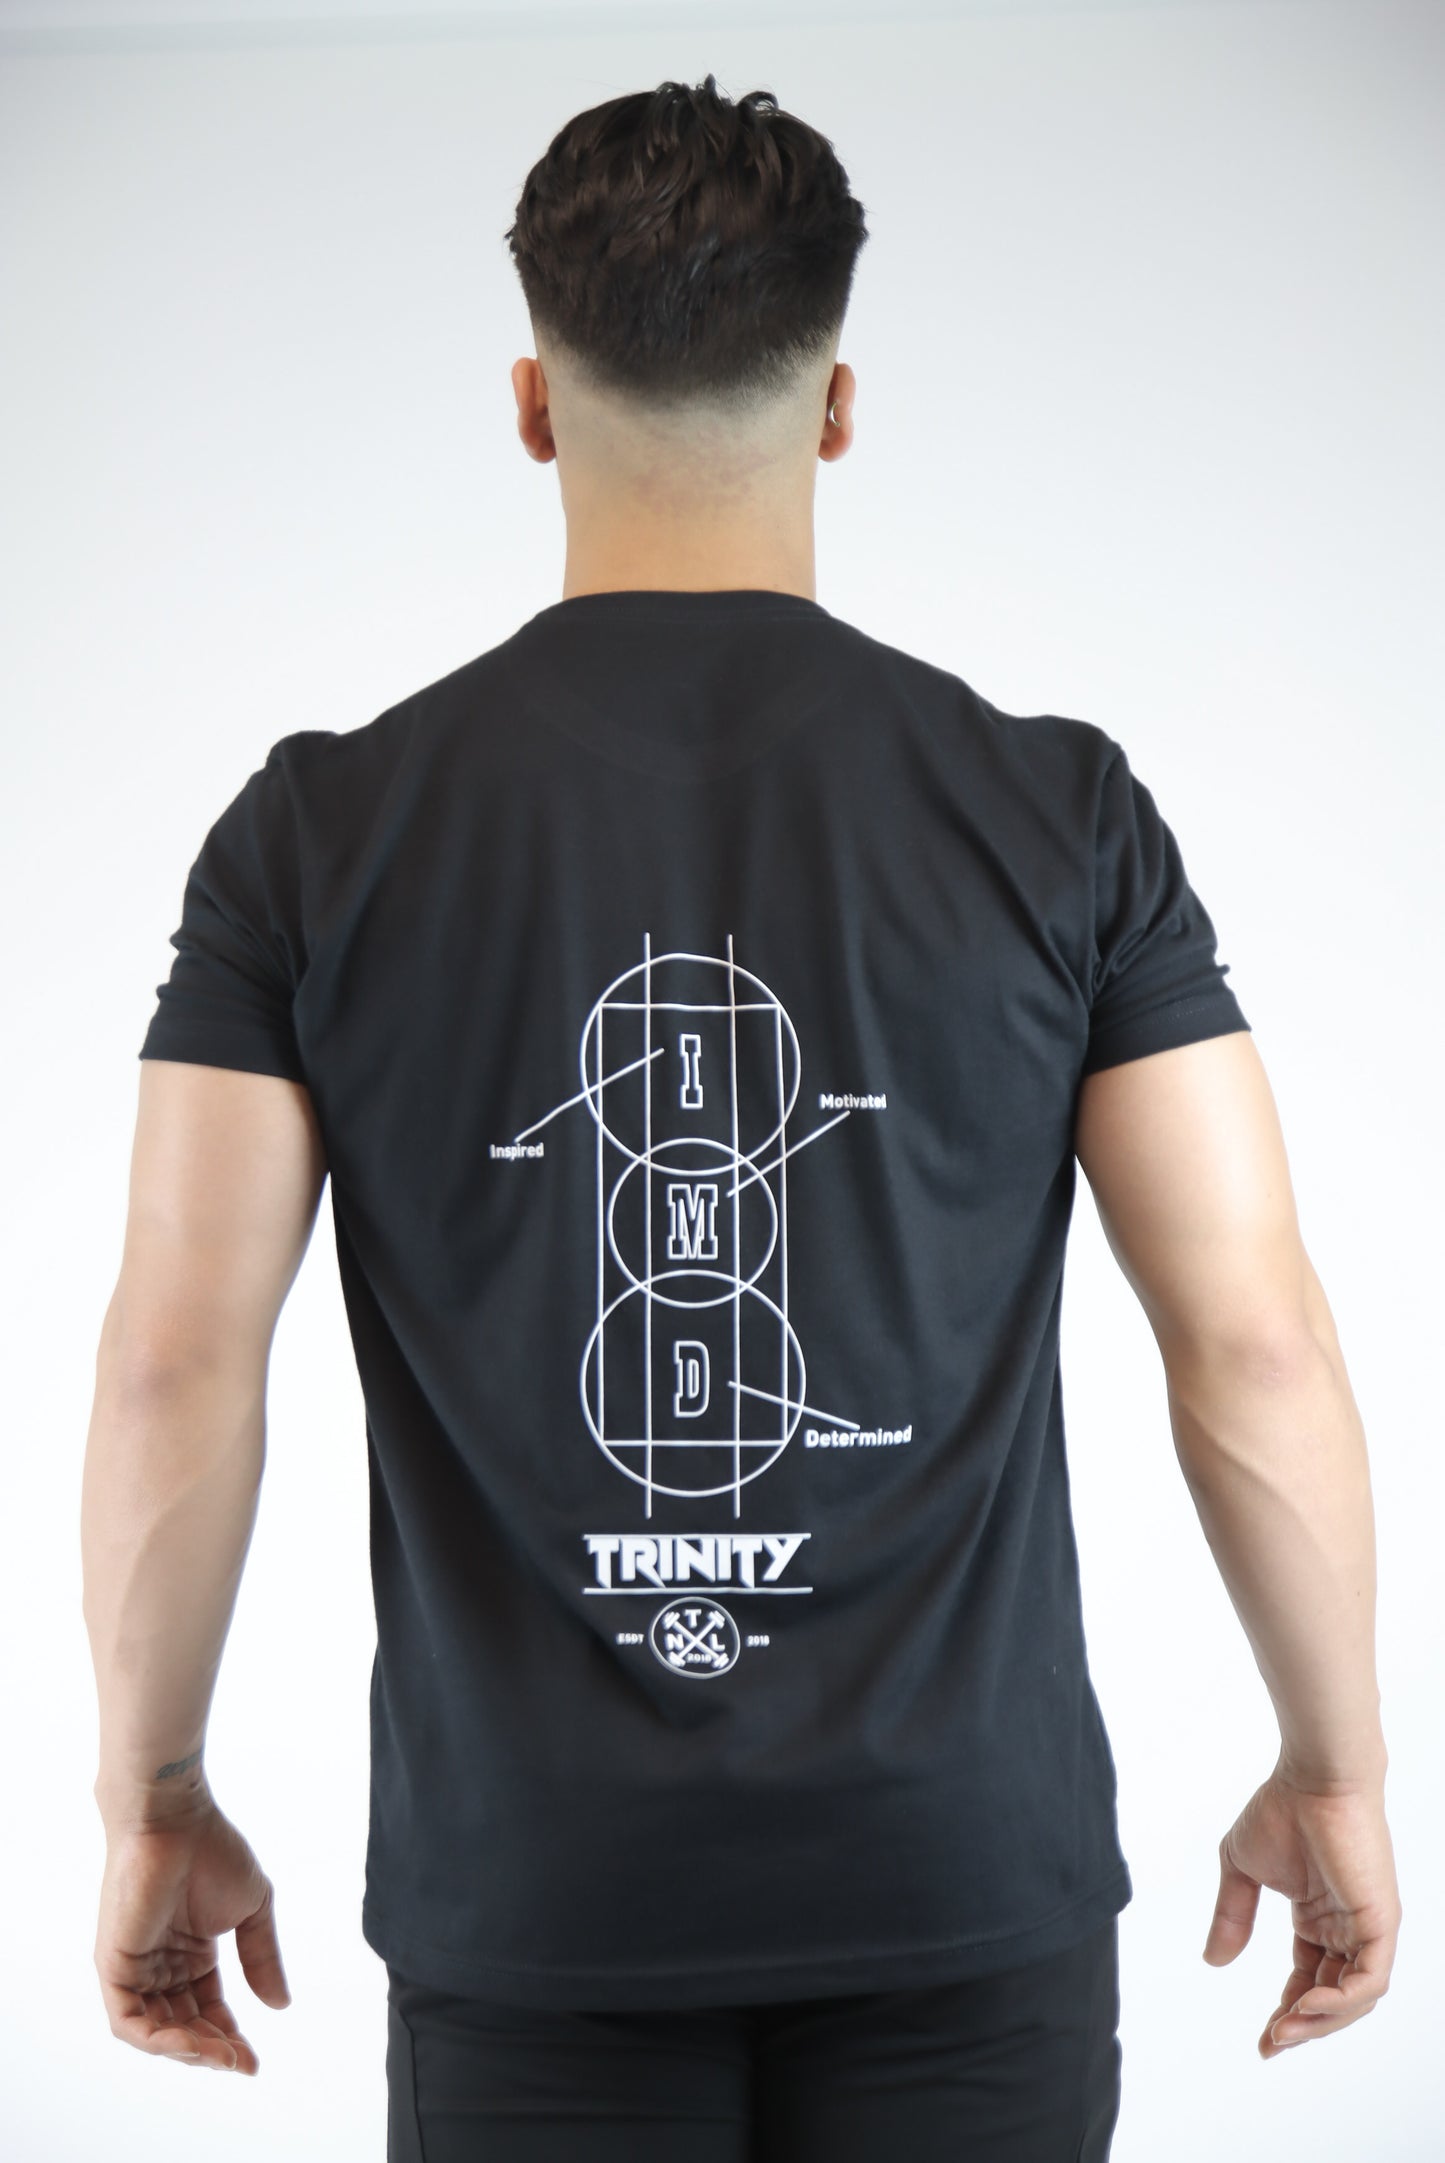 Best fit t-shirt for gym